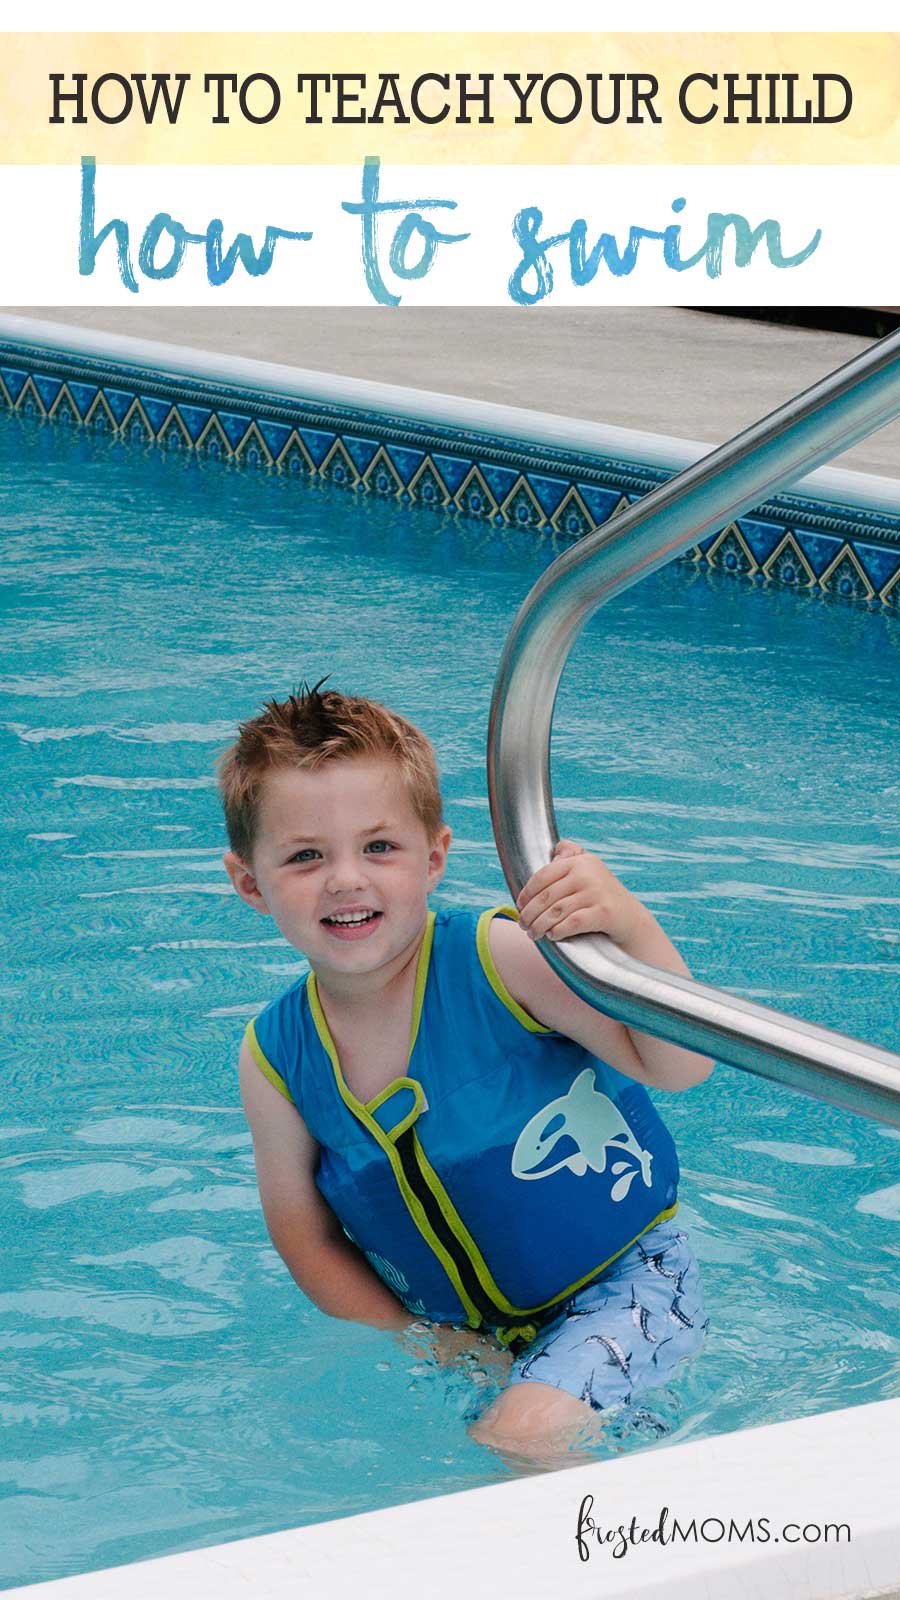 Why It's Important for your Child to Learn to Swim